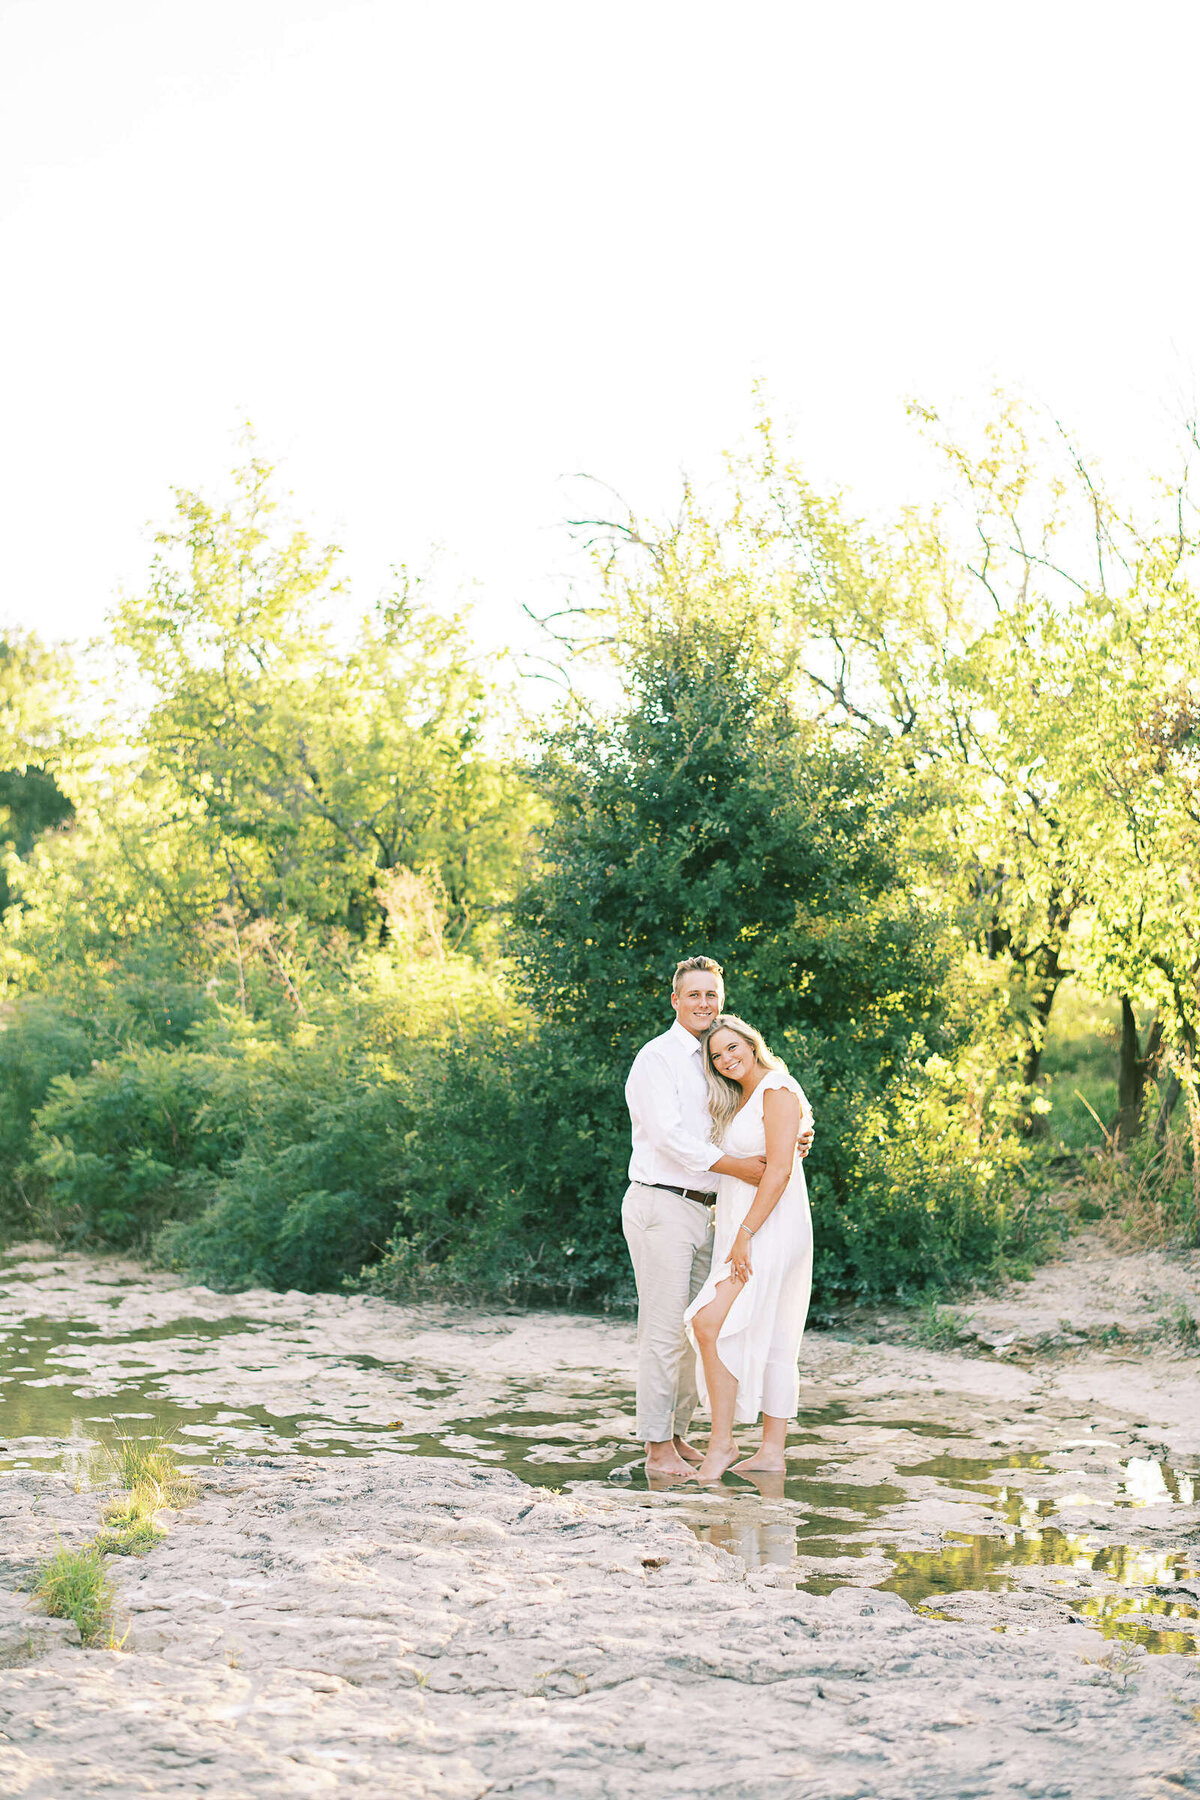 18 Romantic Dallas Engagement Session Kate Panza North Texas Wedding Photography